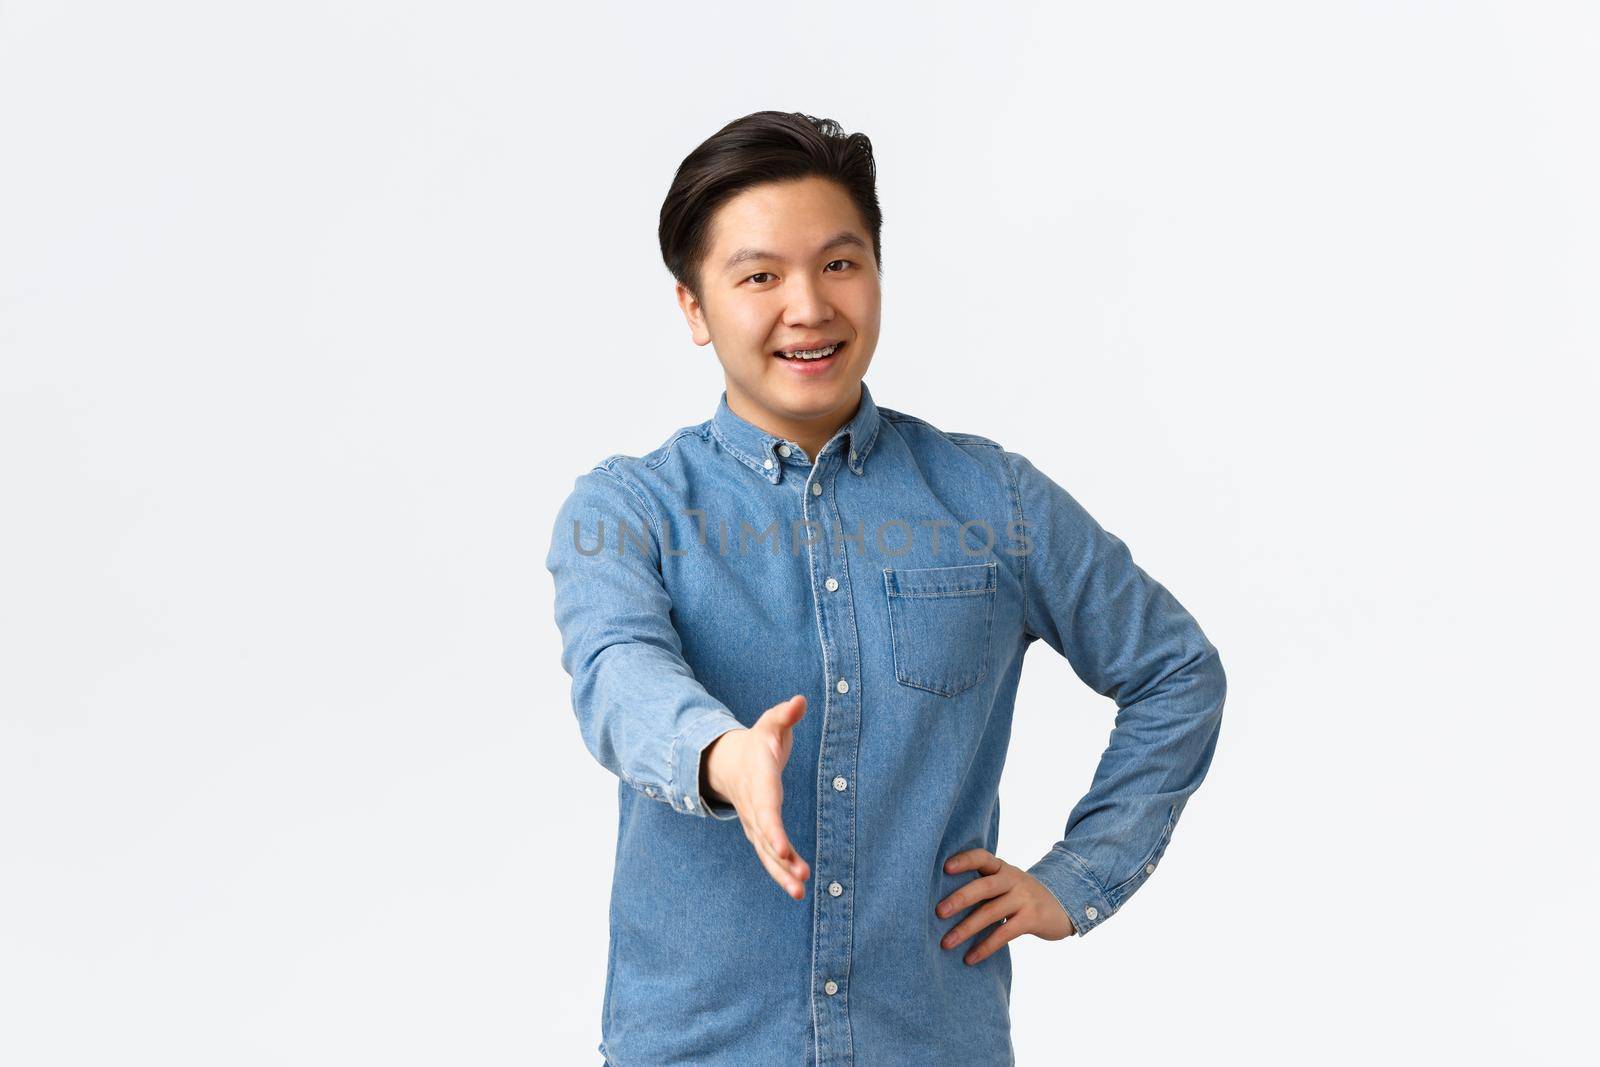 Friendly cheerful asian man searching for job, come to interview, extending hand for handshake, greeting someone, welcome to office, saying hello with happy smile, white background.